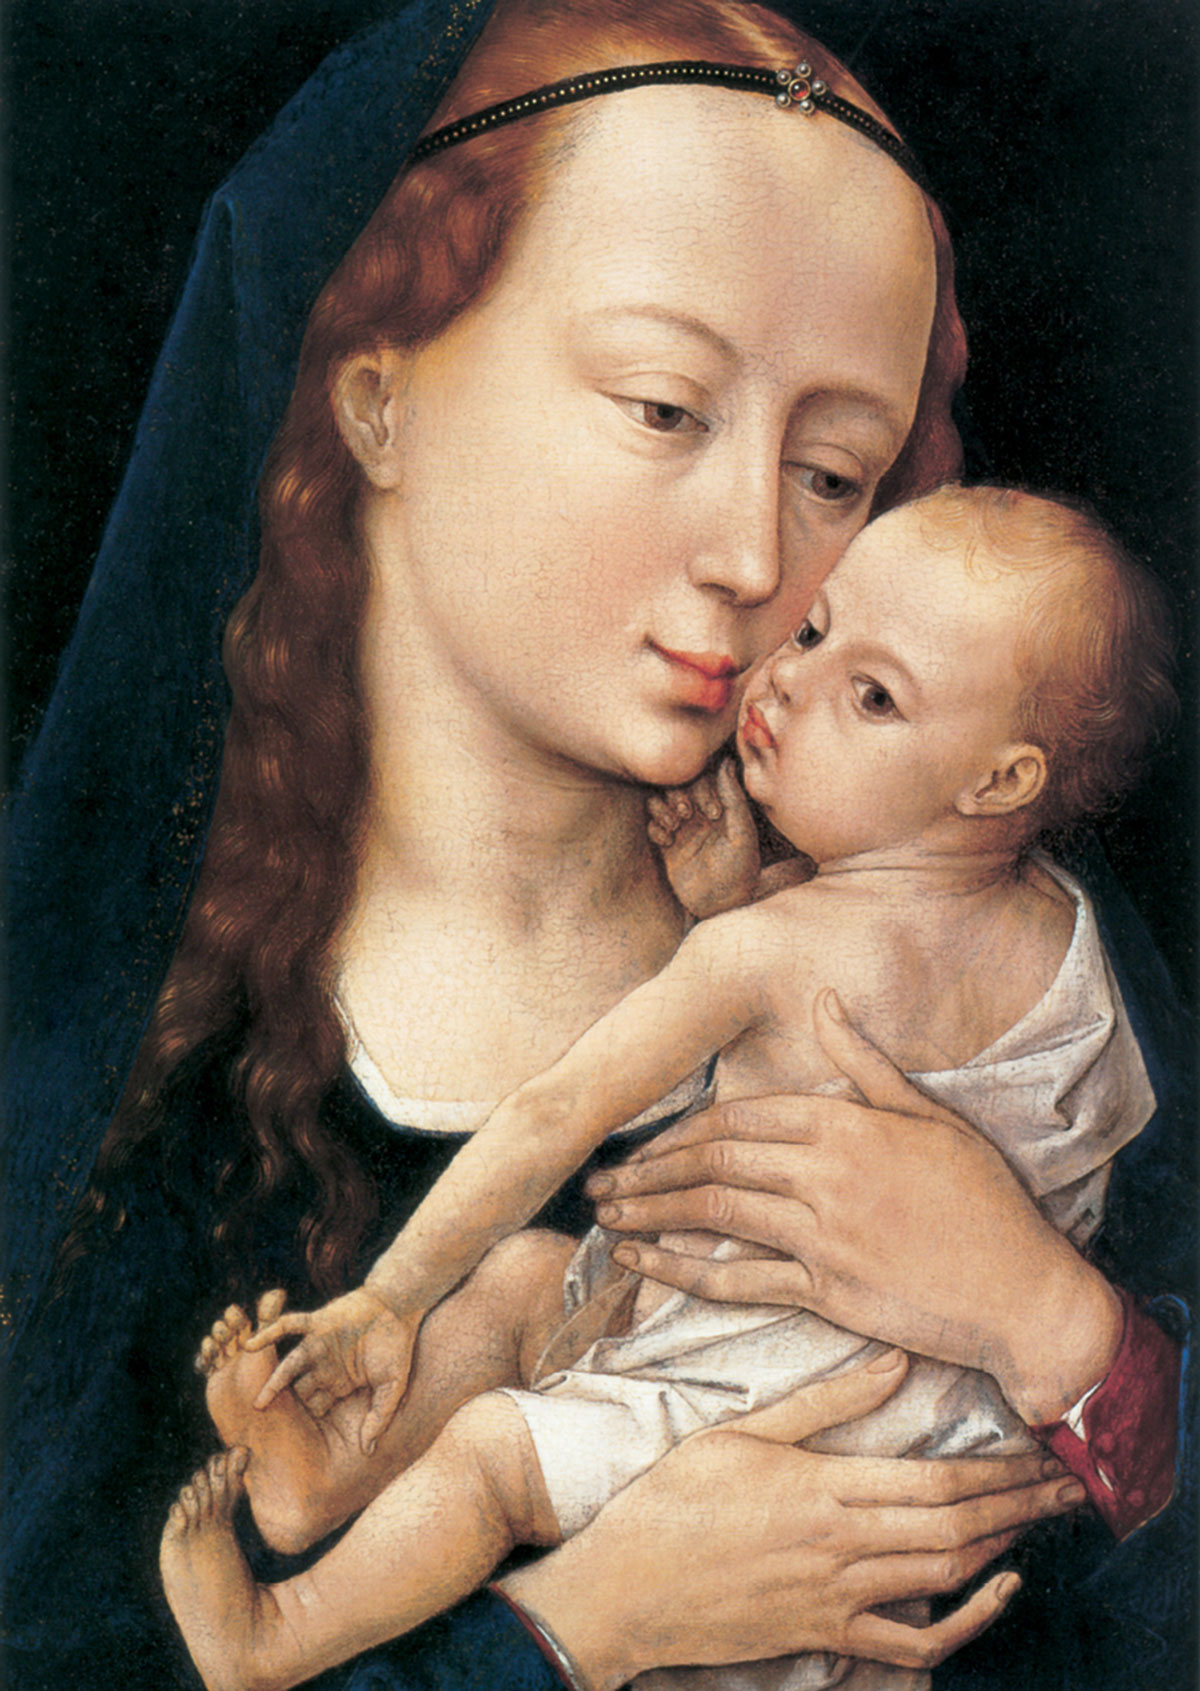 A photograph of a copy of the Cambrai Madonna by Rogier van der Weyden, depicting the virgin holding the child, circa 1455-1460.